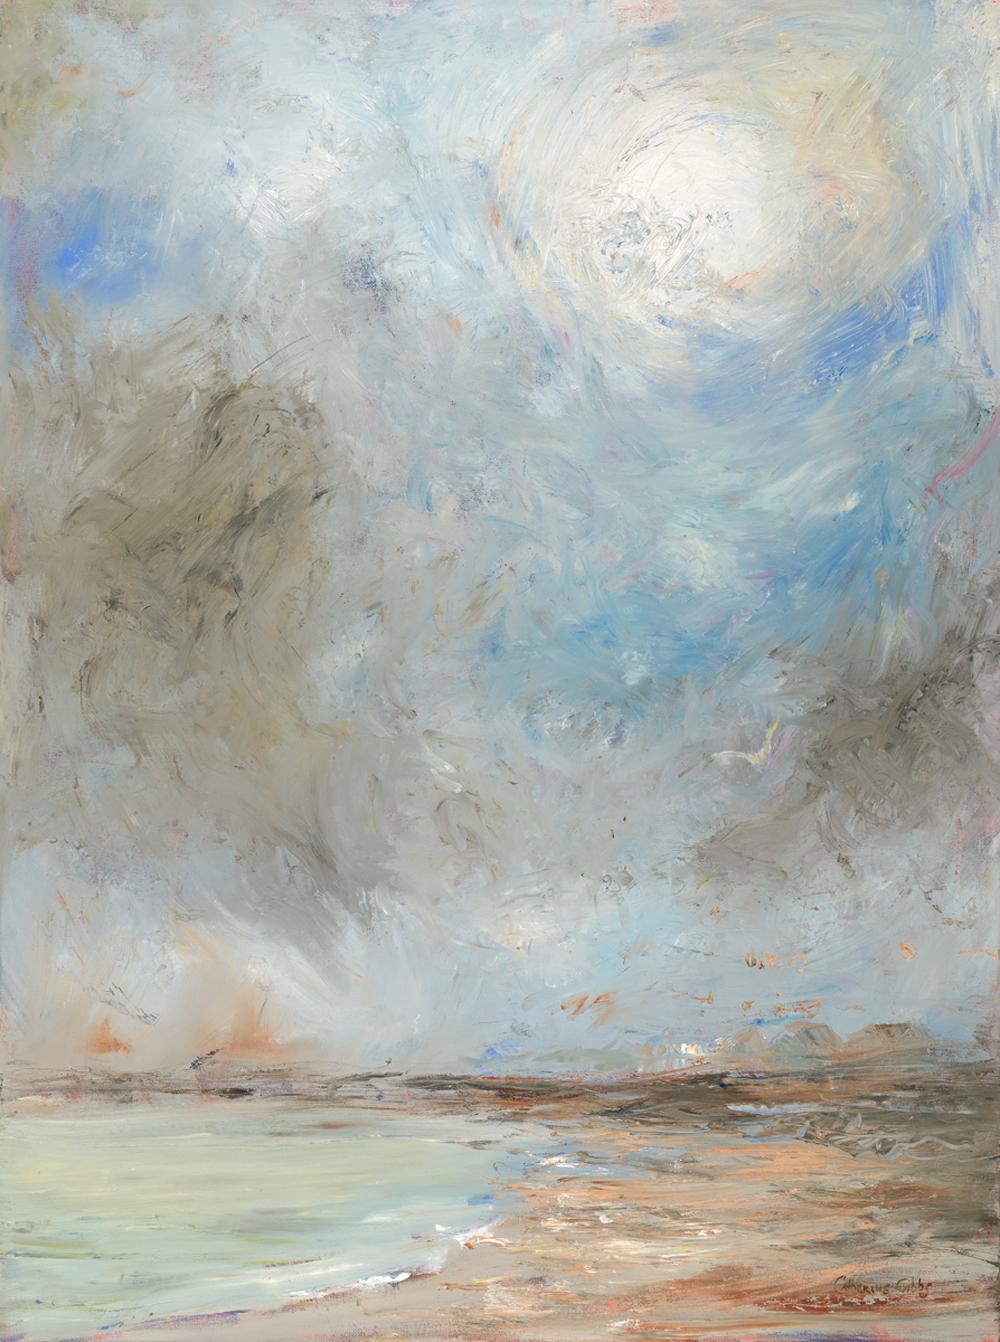 Catherine Picard-Gibbs Landscape Painting - "The Sun Breaking Through at Goose Rocks Beach", Catherine Gibbs, oil, landscape